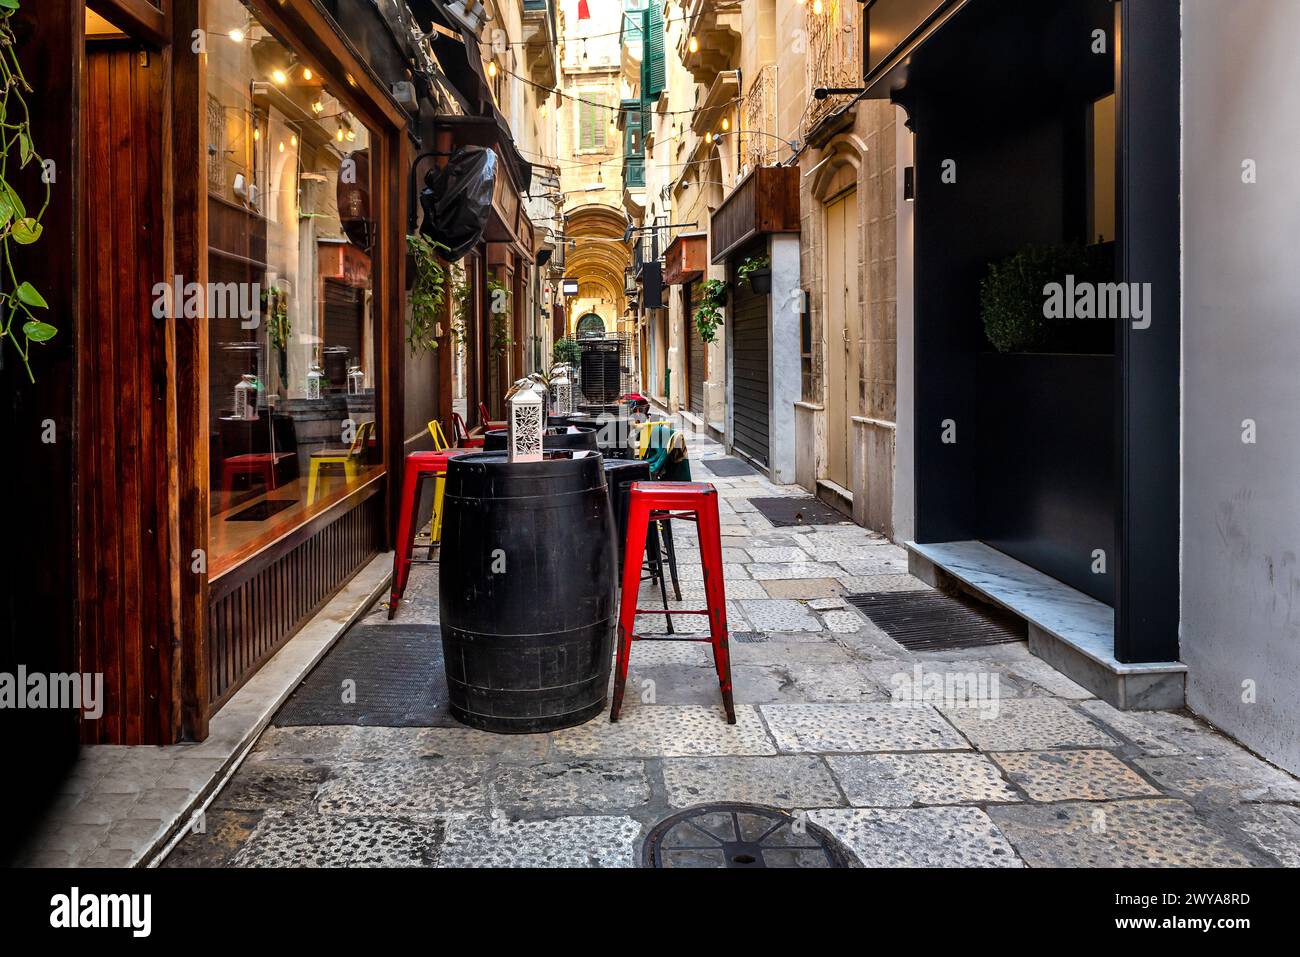 Narrow street with cafes and restaurants in city centre of Valletta, Malta. Stock Photo